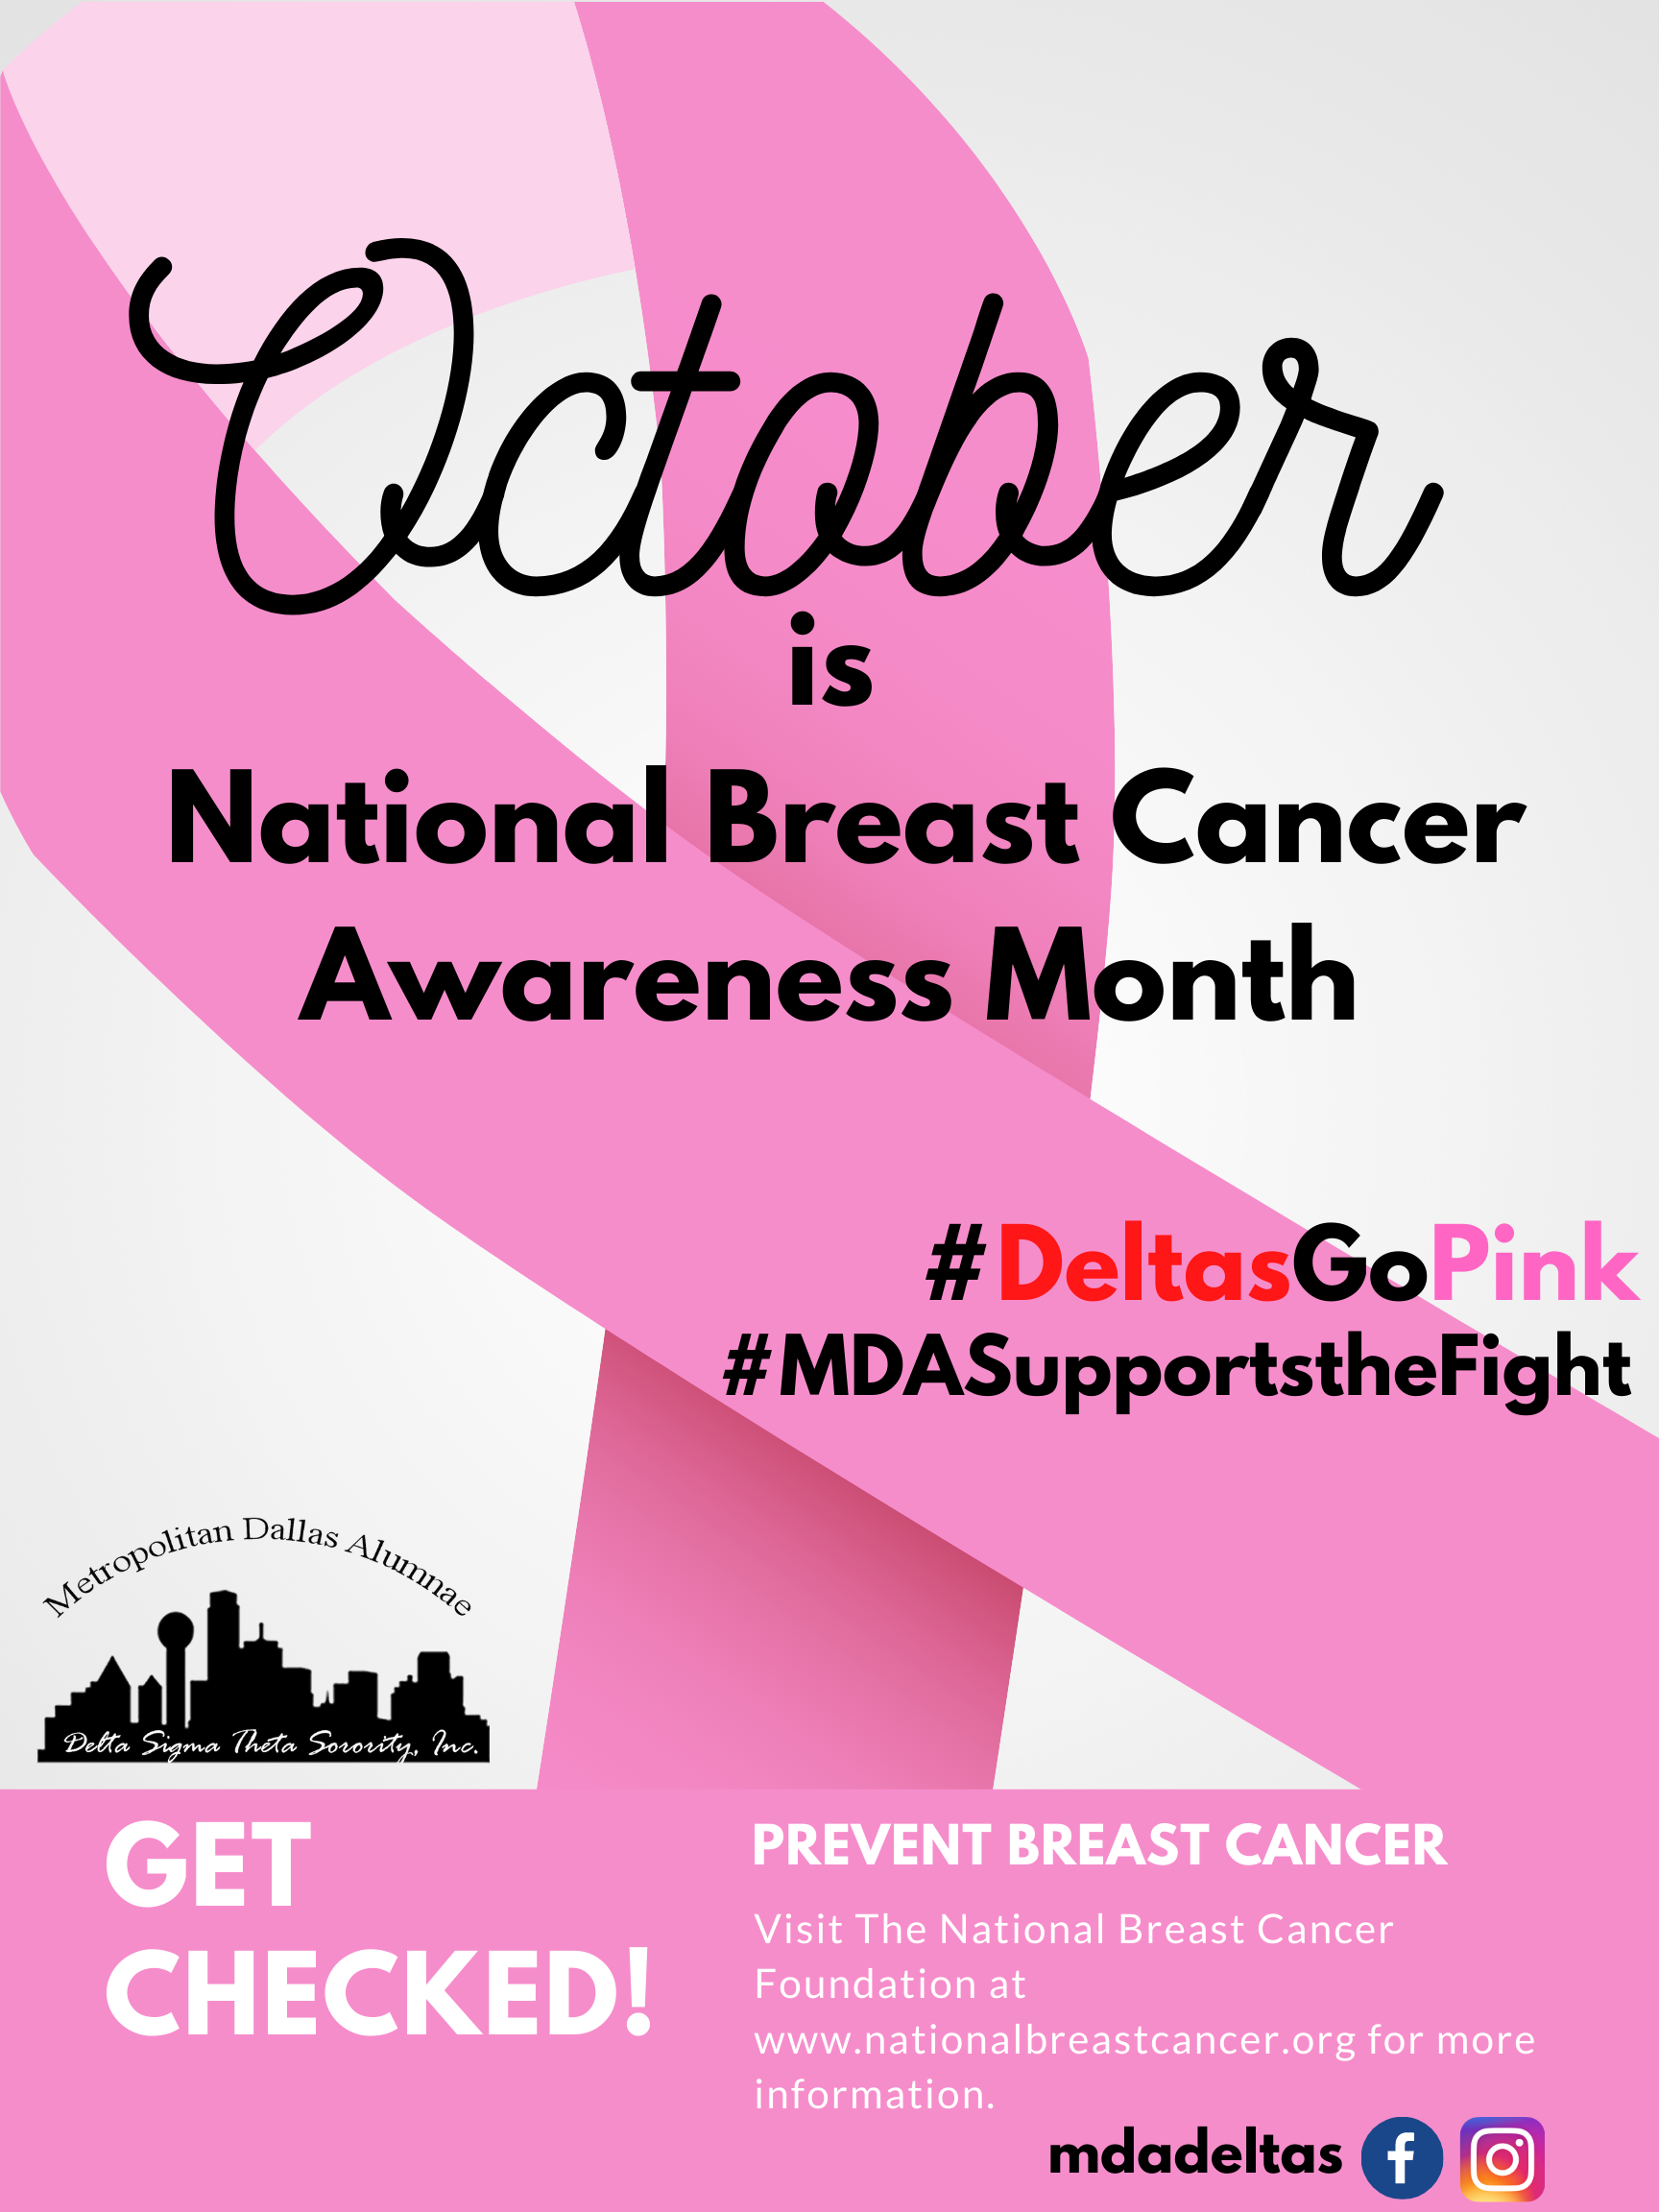 mda-breast-cancer-awareness-flyer-4-moving-delta-ahead